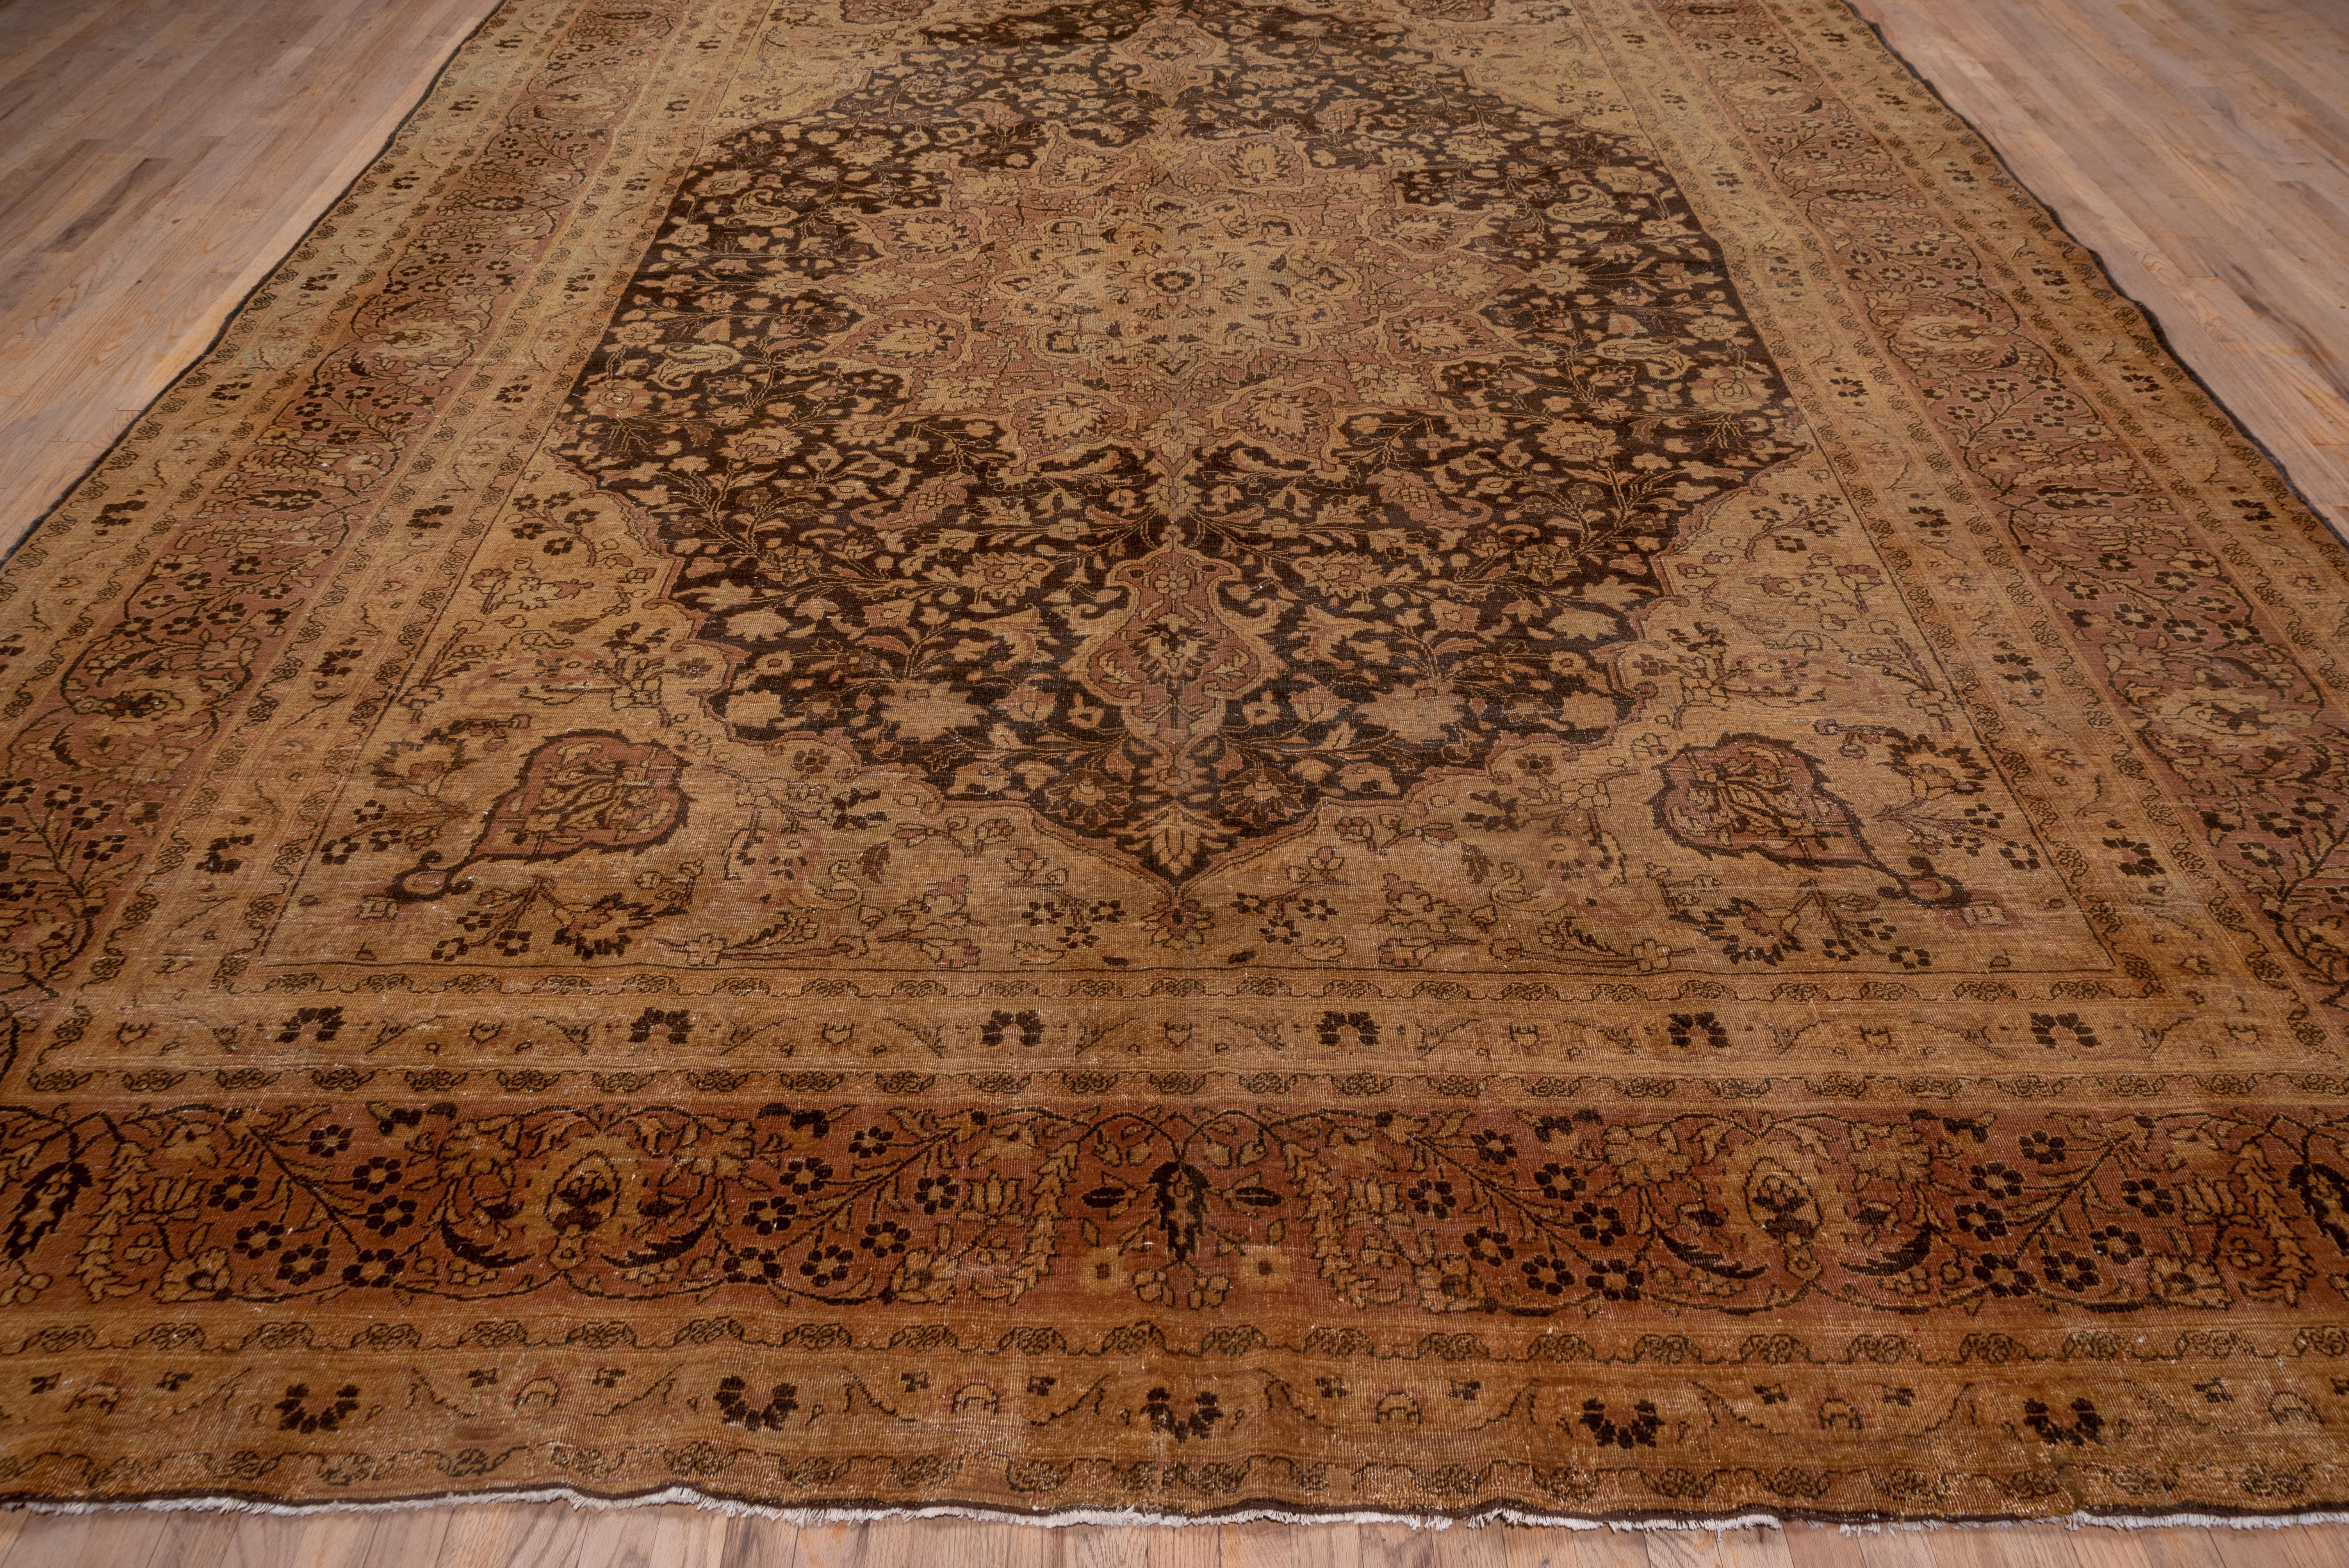 The pointed dark blue field encloses a coral-buff 16 point palmette medallion enclosing a lobed beige sub-medallion, all set within joined beige corners with grey-green escutcheon medallions. The matching main border of this well-worn NE Persian